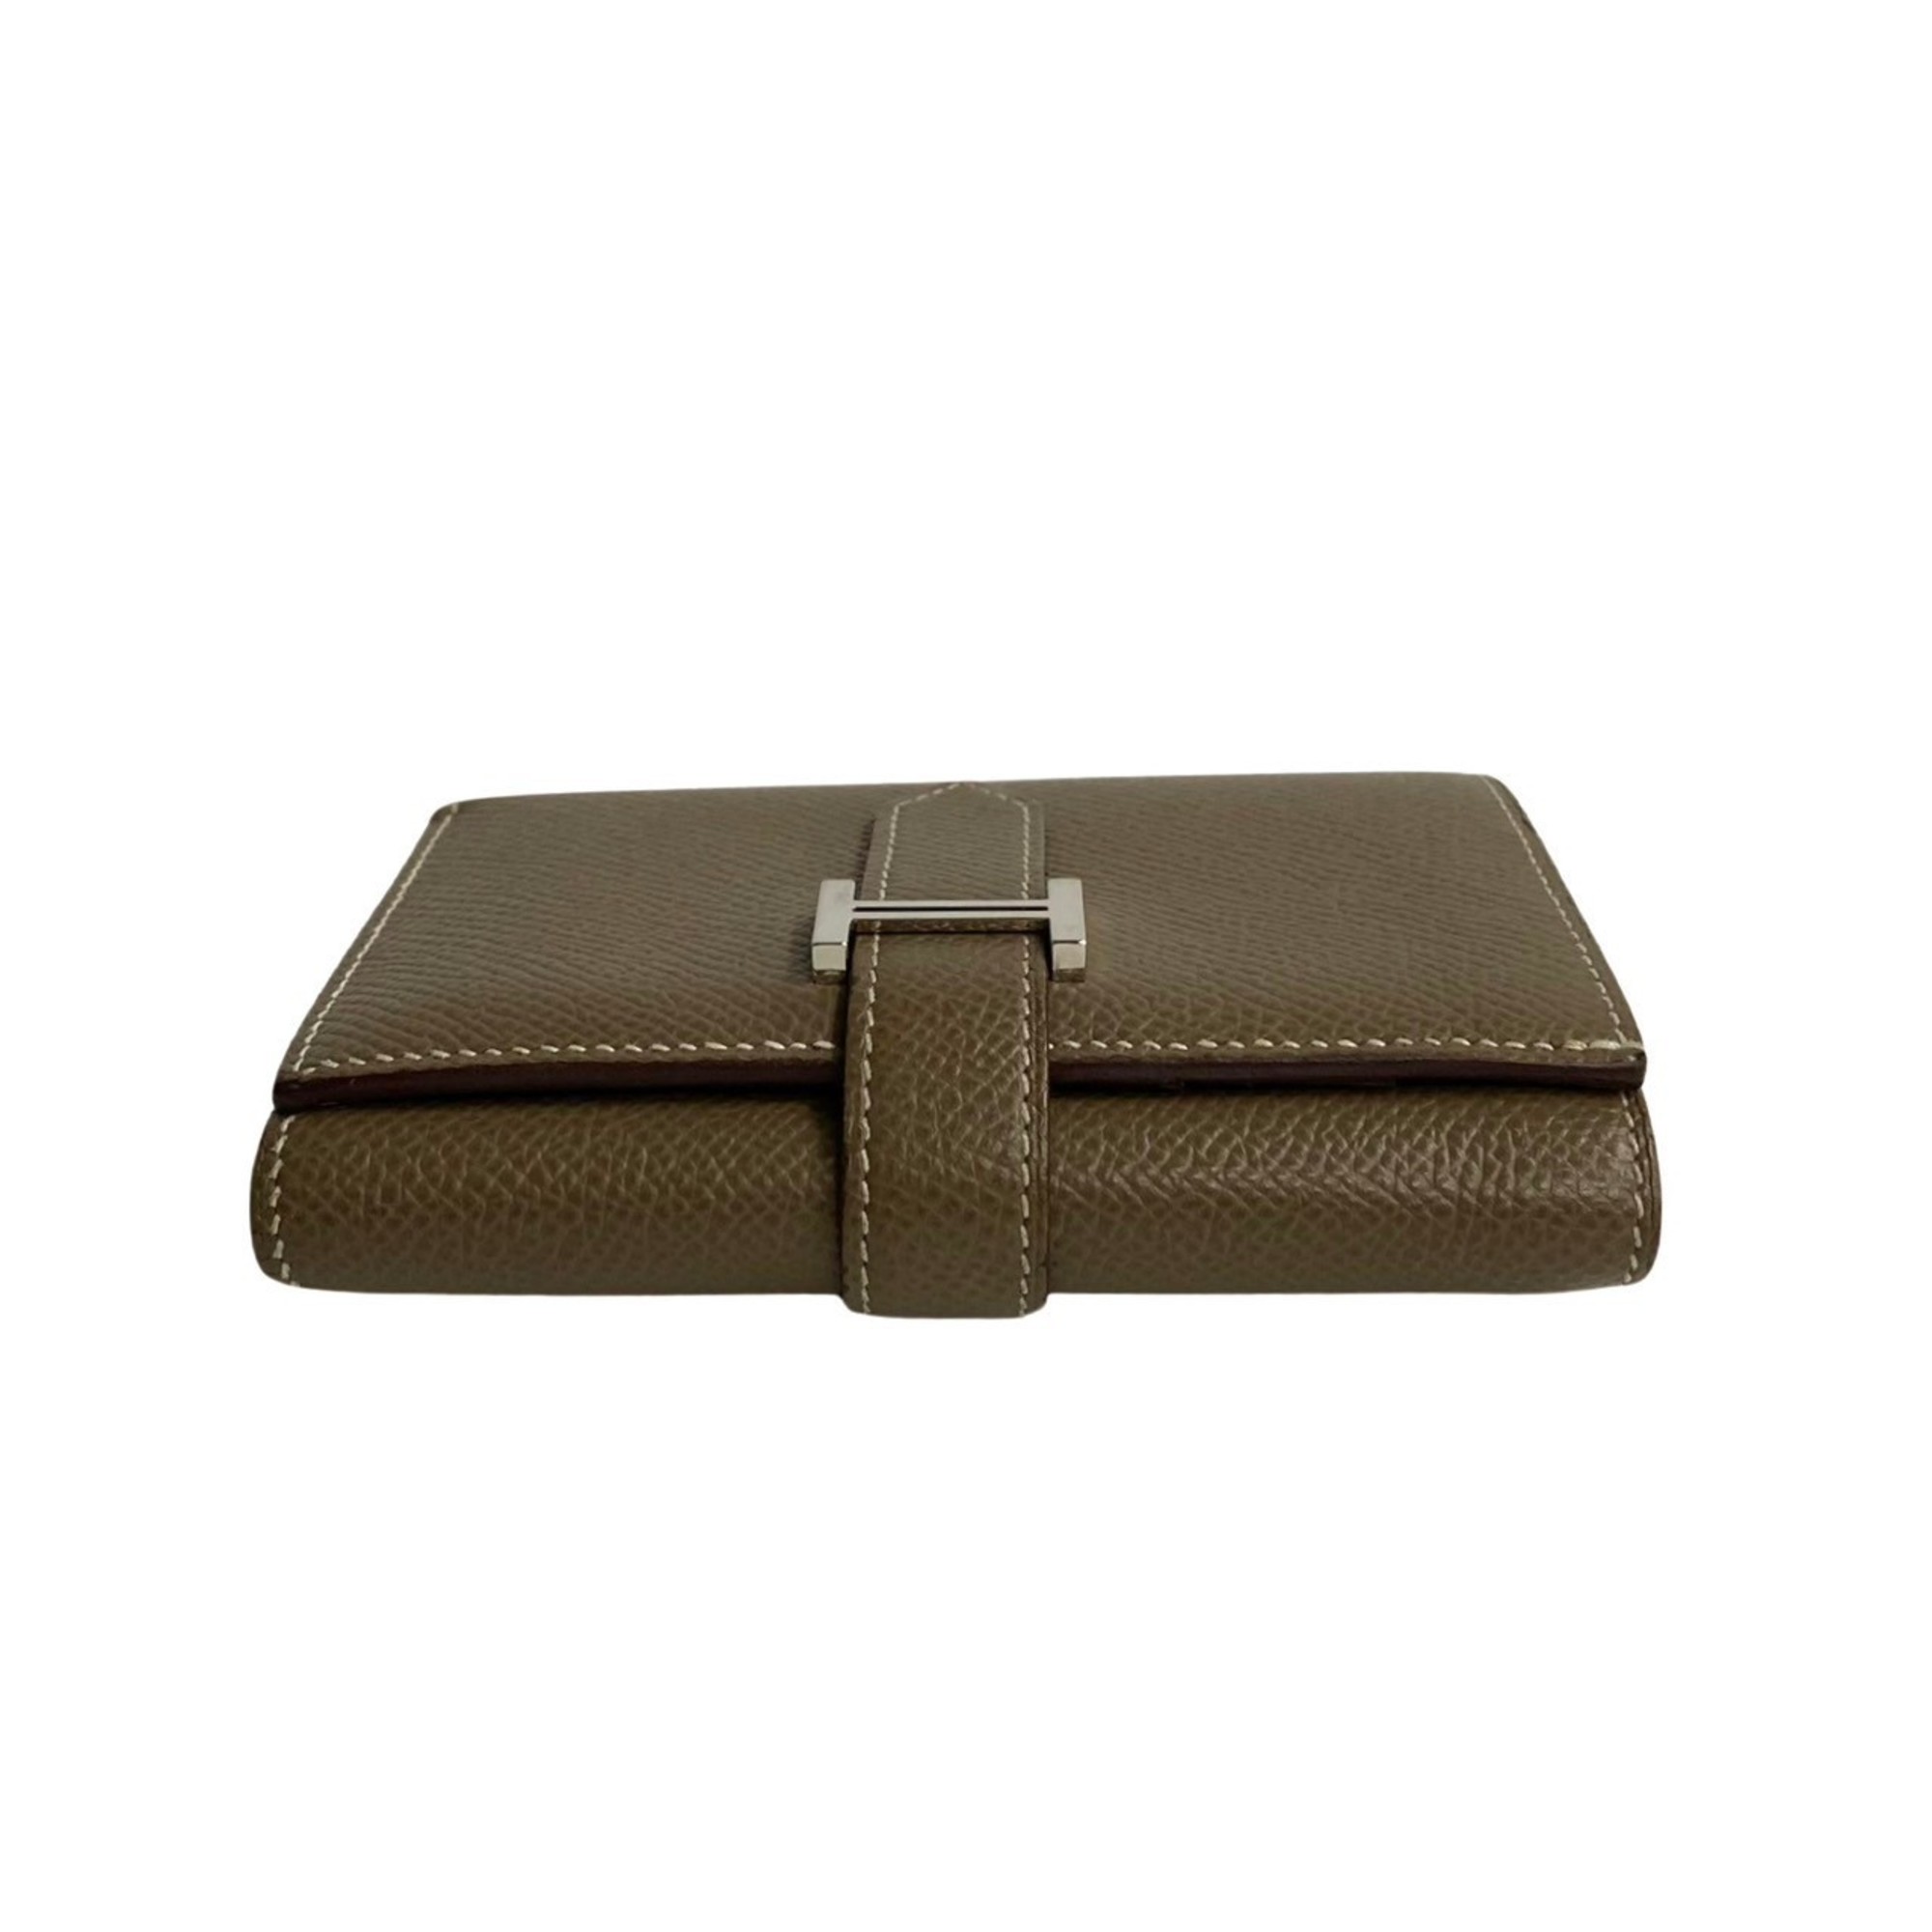 HERMES Bearn Combination Epson Leather Tri-fold Wallet Compact Greige 16003